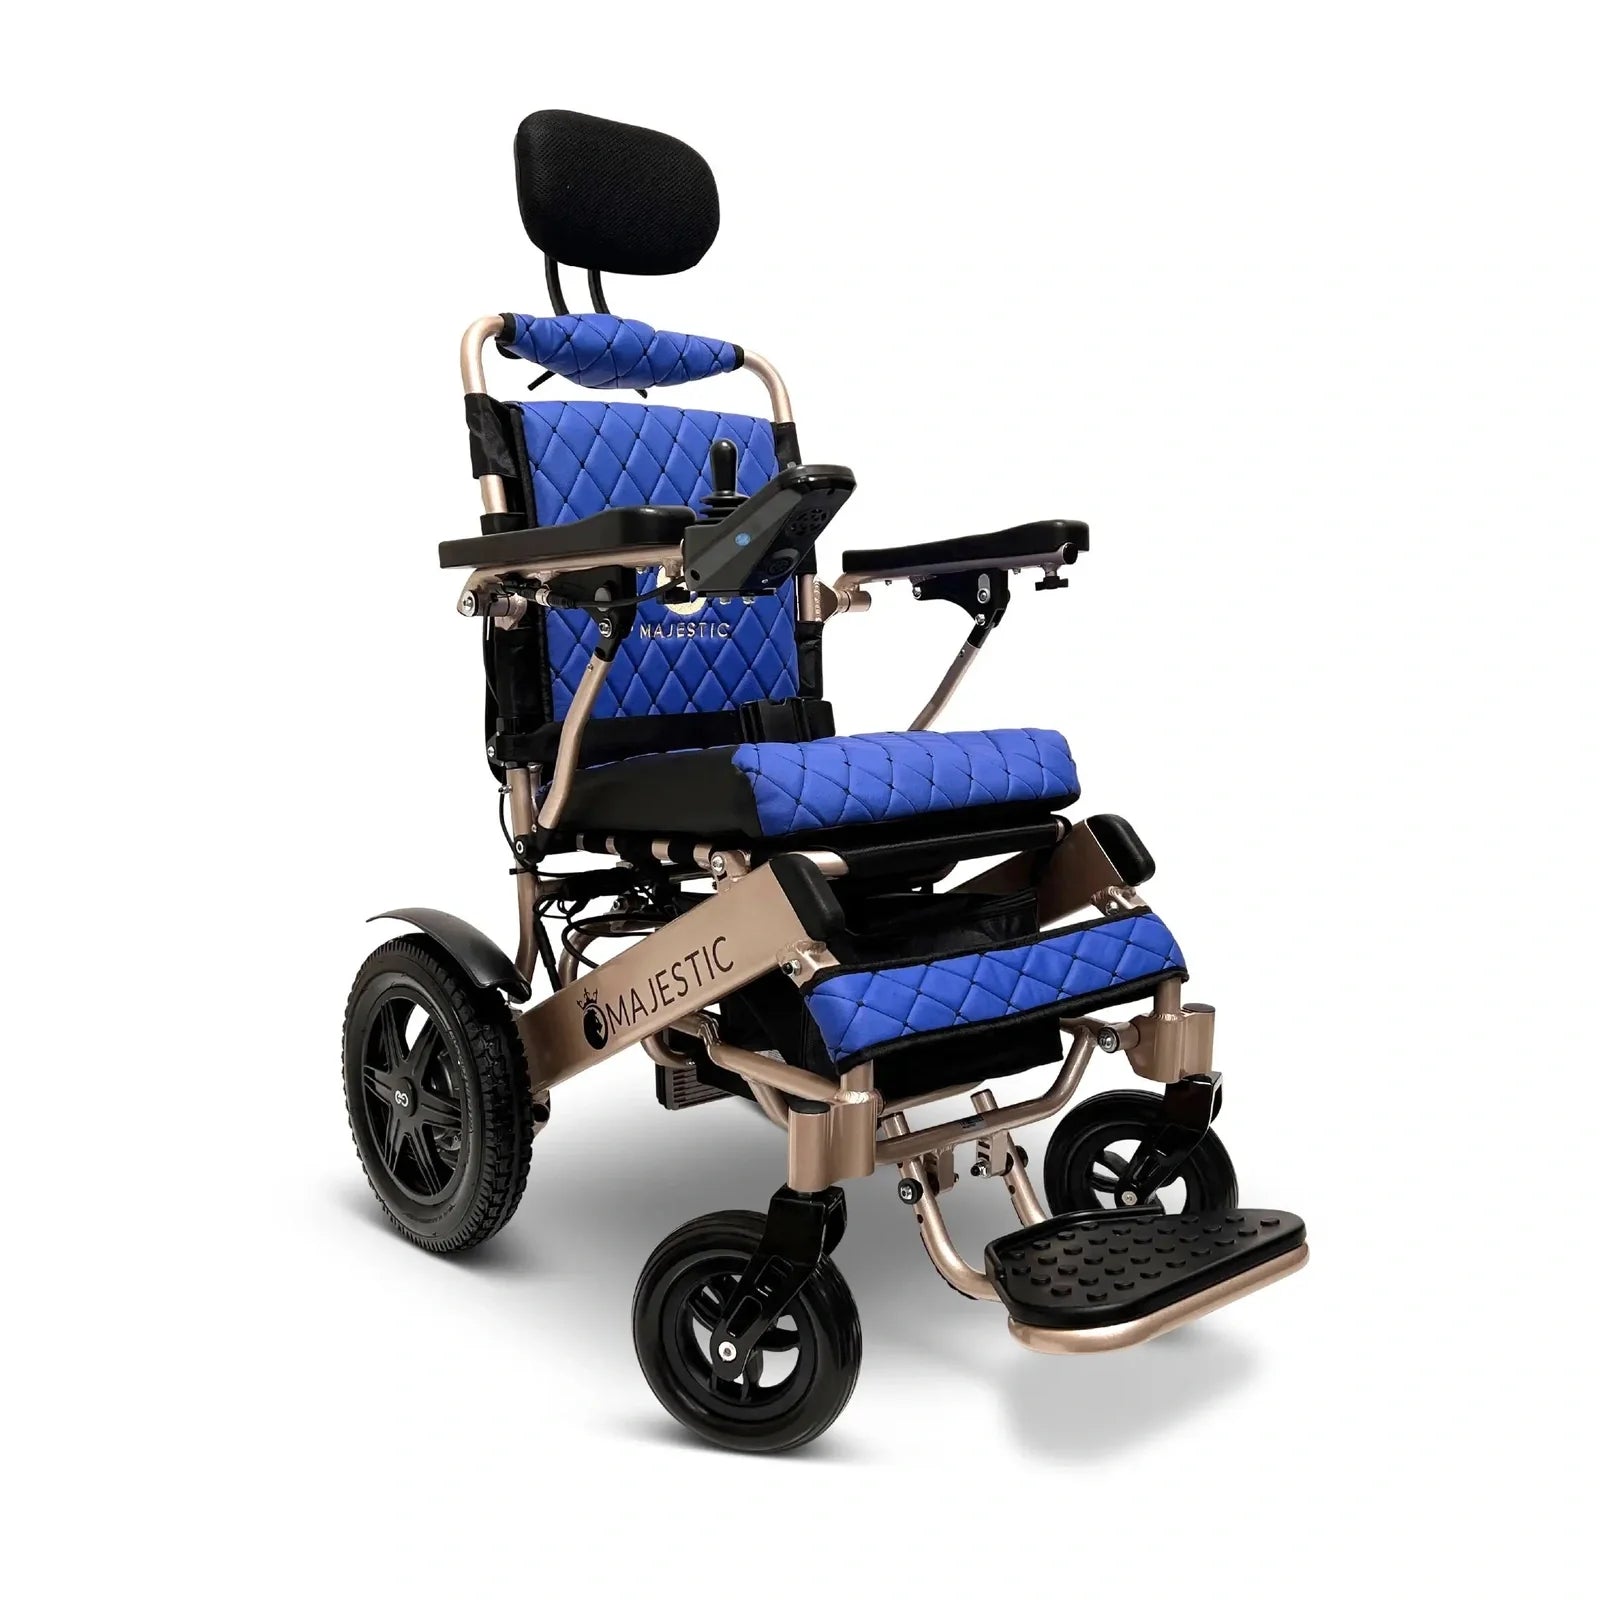 ComfyGO Majestic IQ-9000 Long Range Remote Controlled Folding Reclining Electric Wheelchair Power Wheelchairs ComfyGO Bronze Blue Auto Reclining